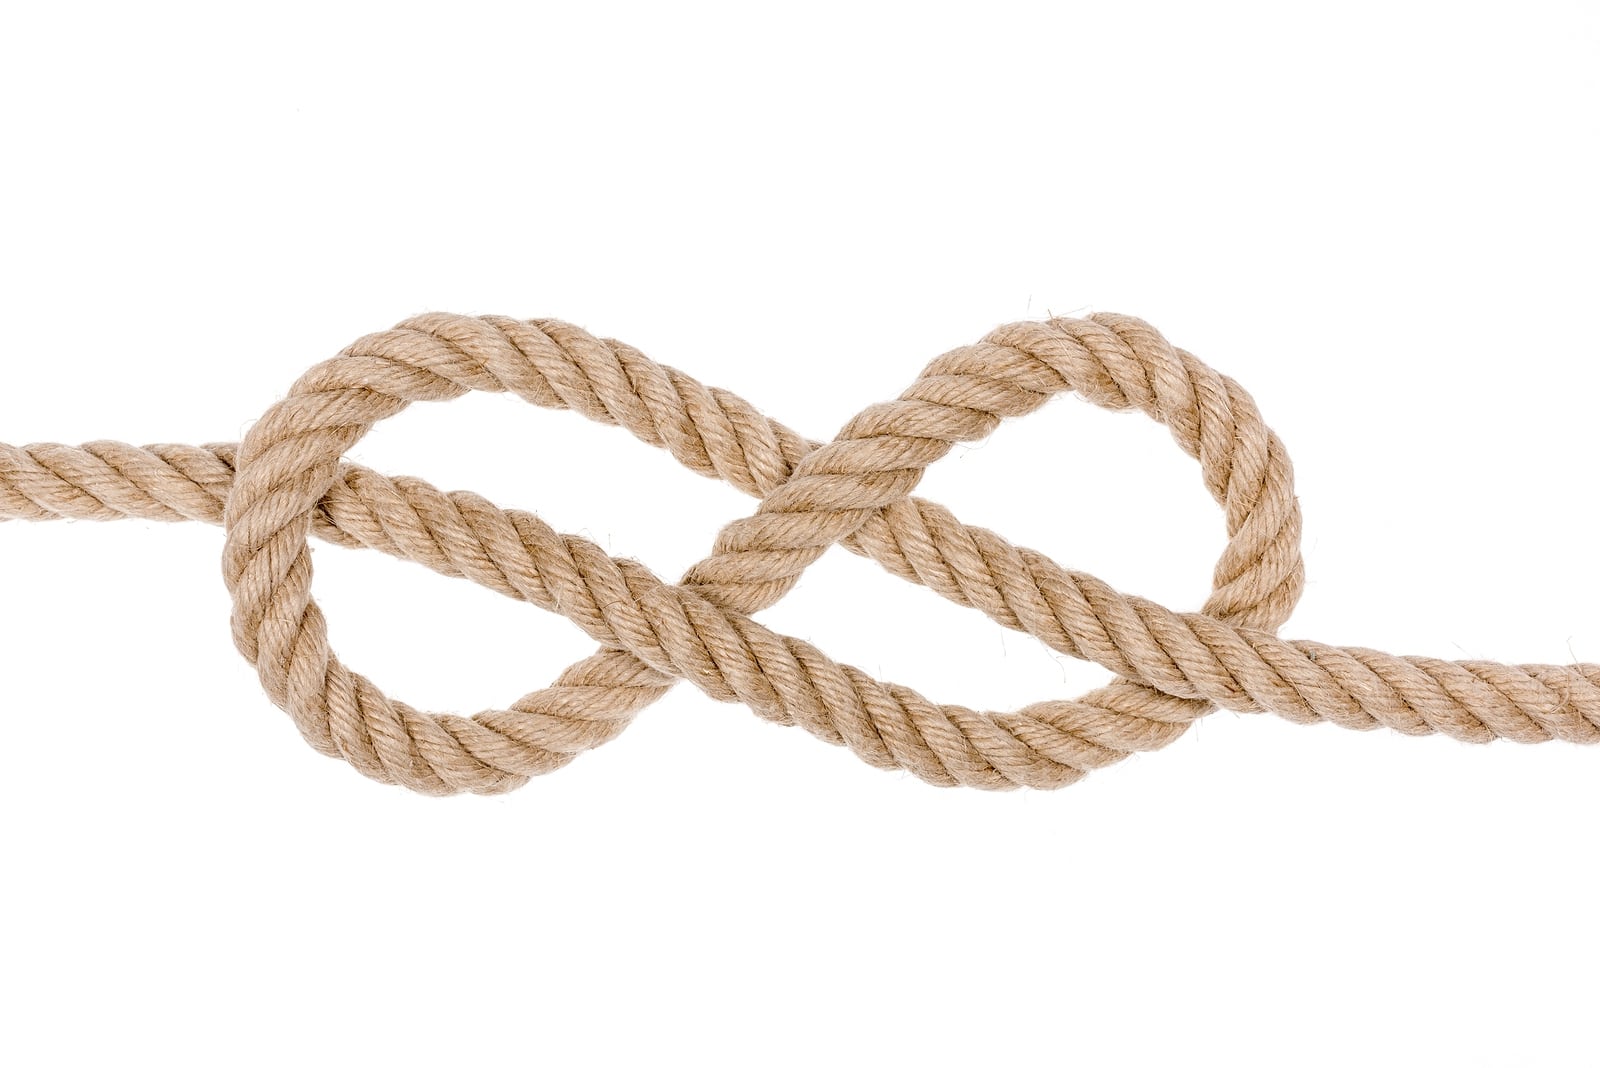 Sailing: The Most Useful Knots and When to Use Them